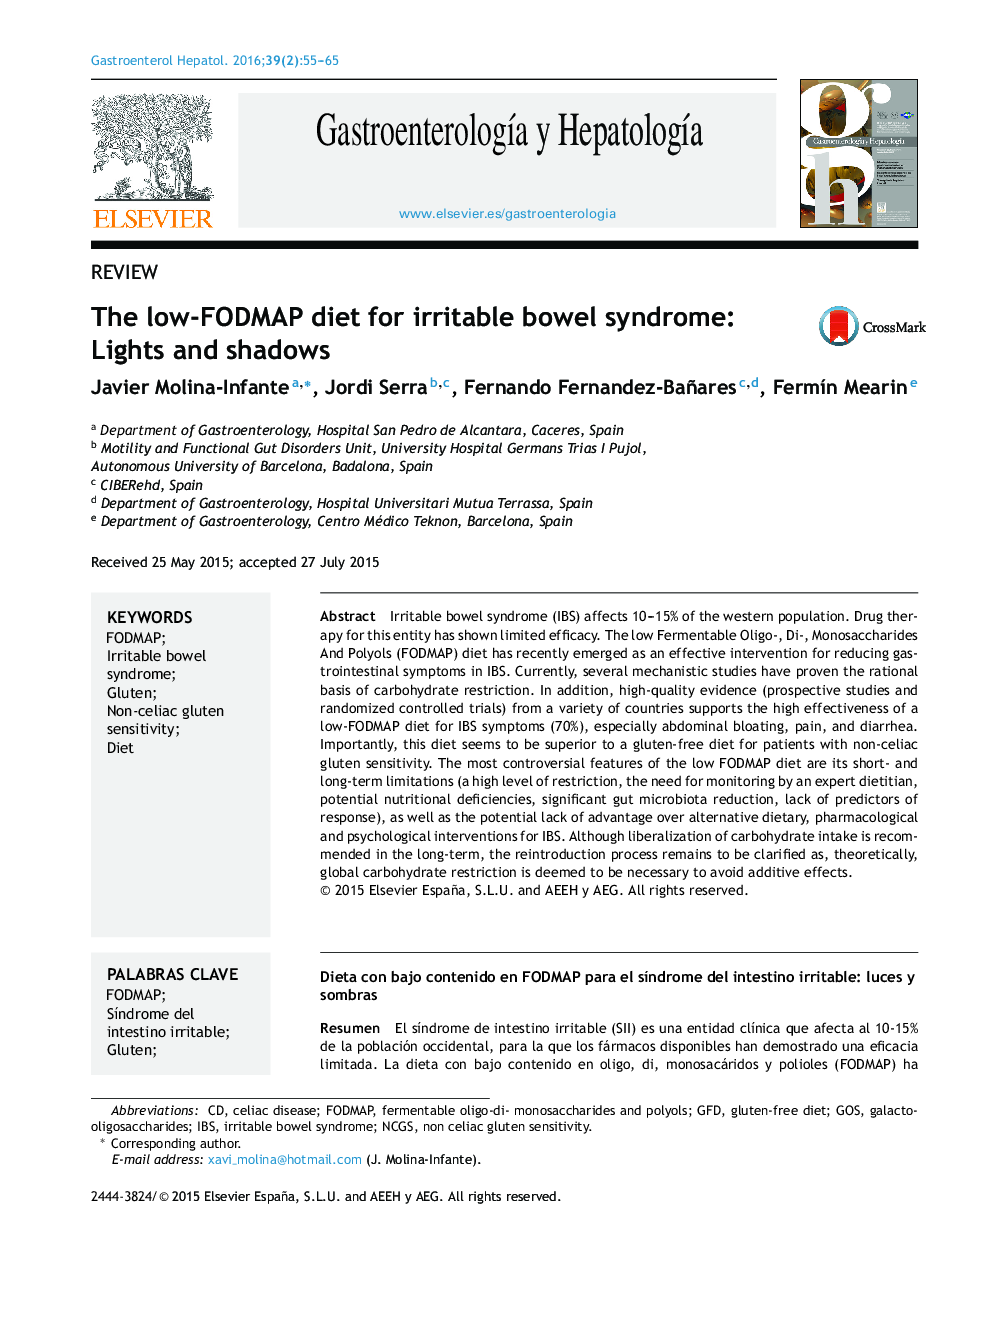 The low-FODMAP diet for irritable bowel syndrome: Lights and shadows